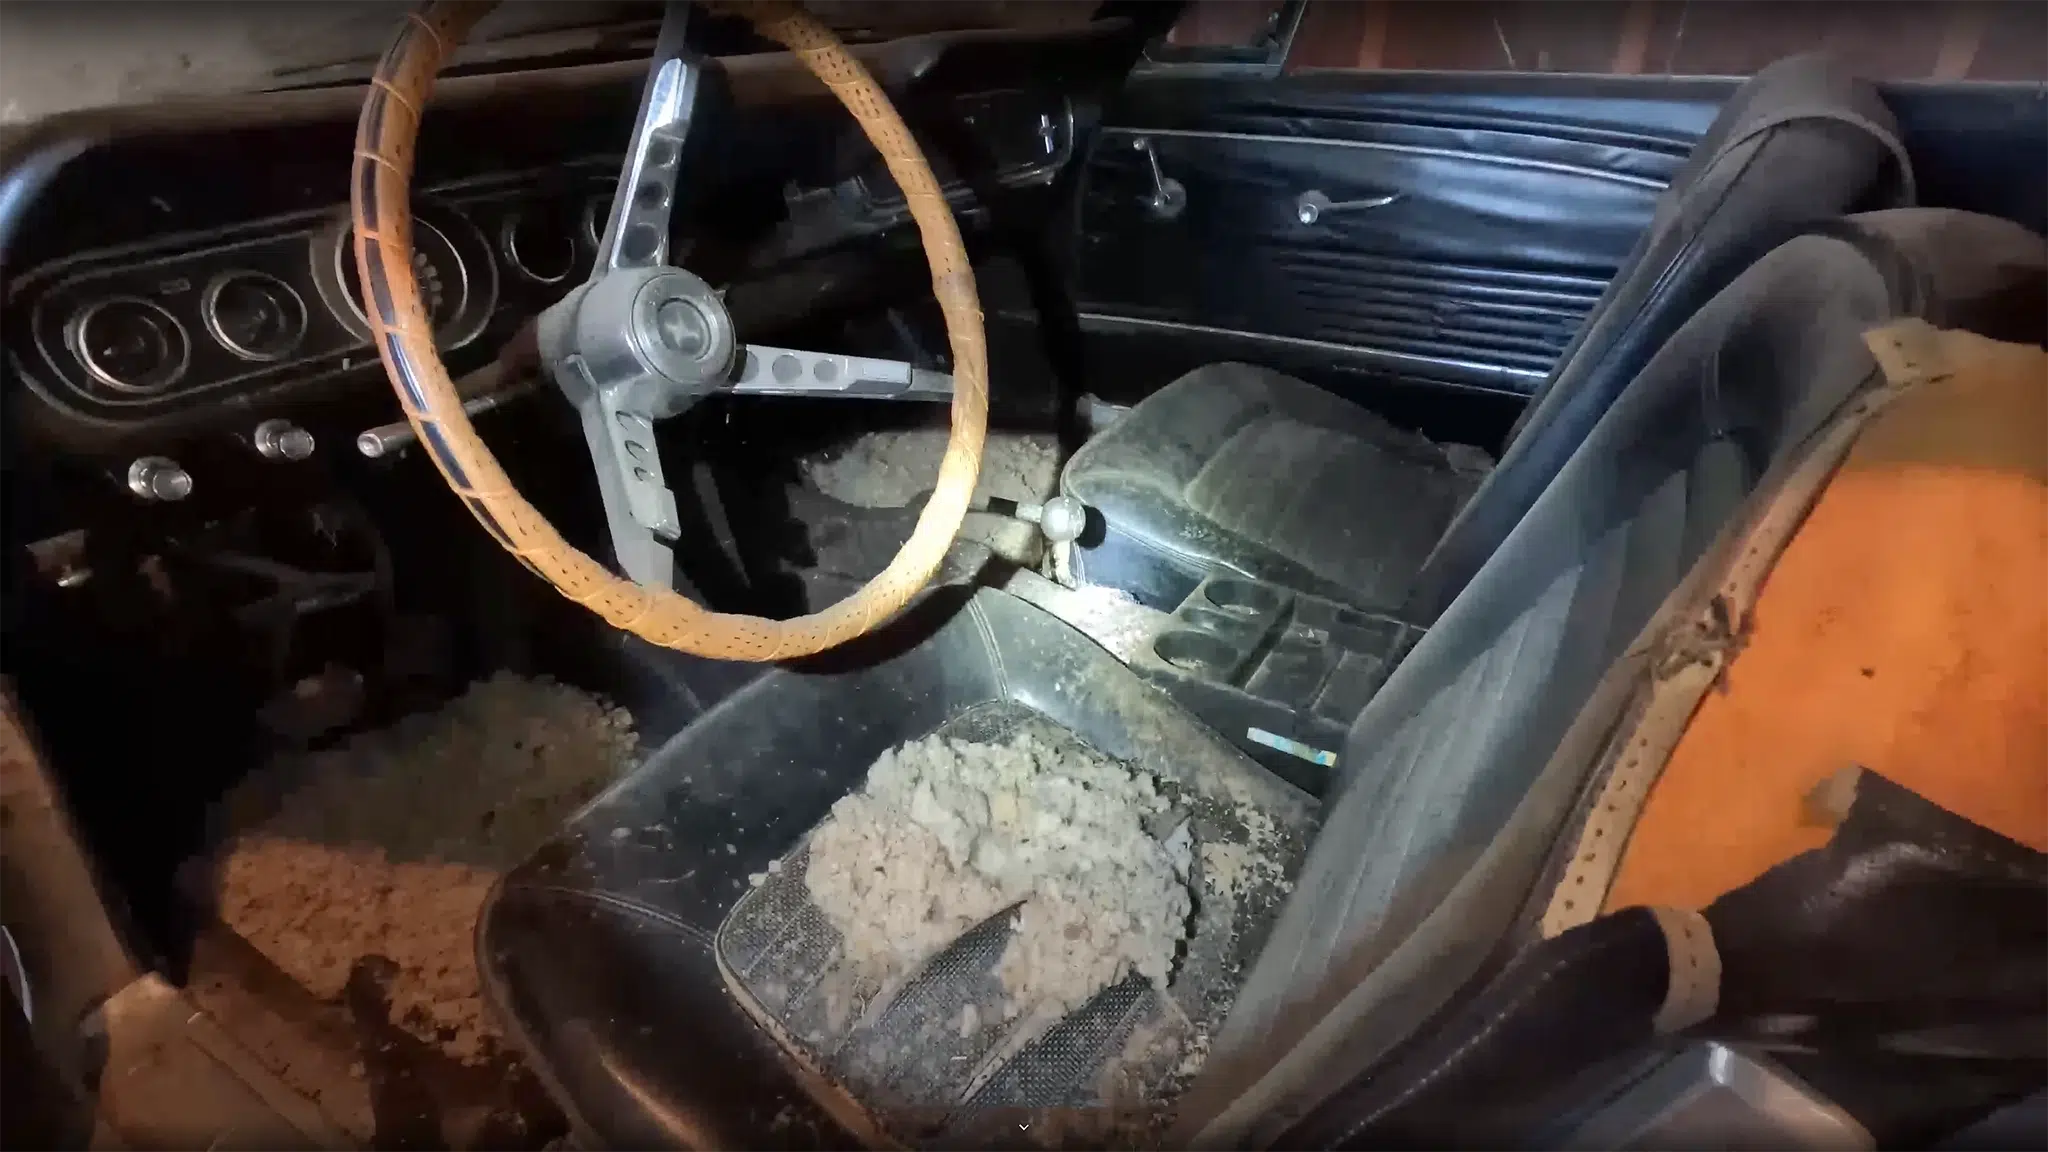 Ford Mustang barn find interior